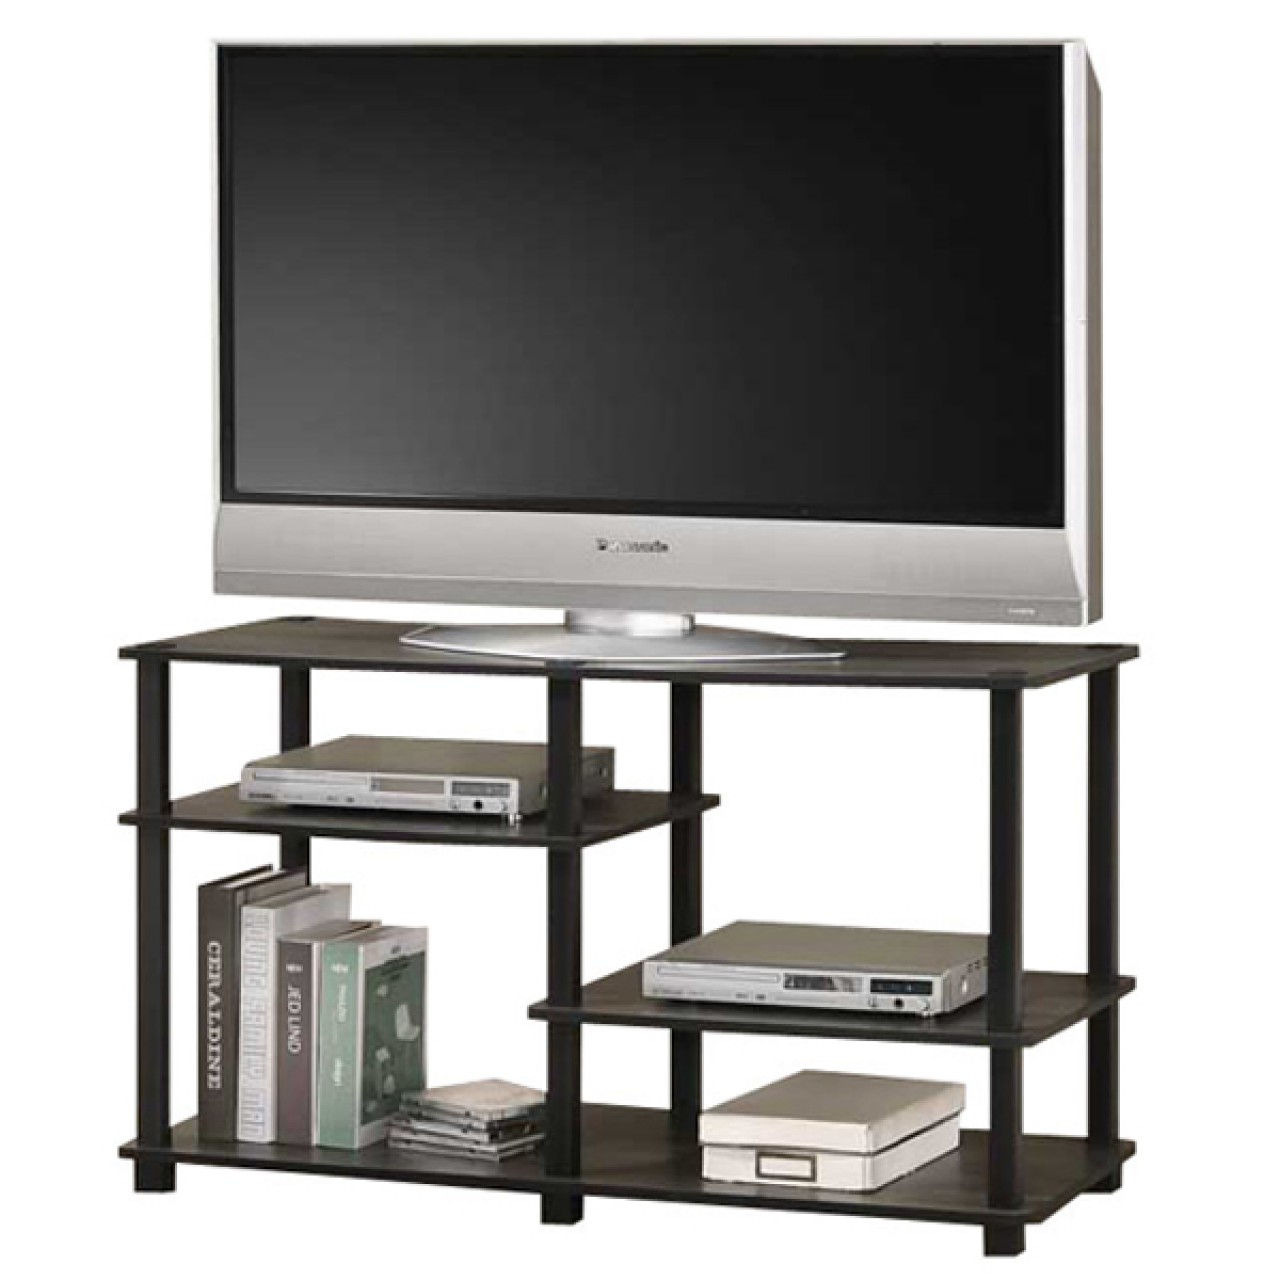 BRIGHTHOME 3 LAYER TV STAND PPS7S  